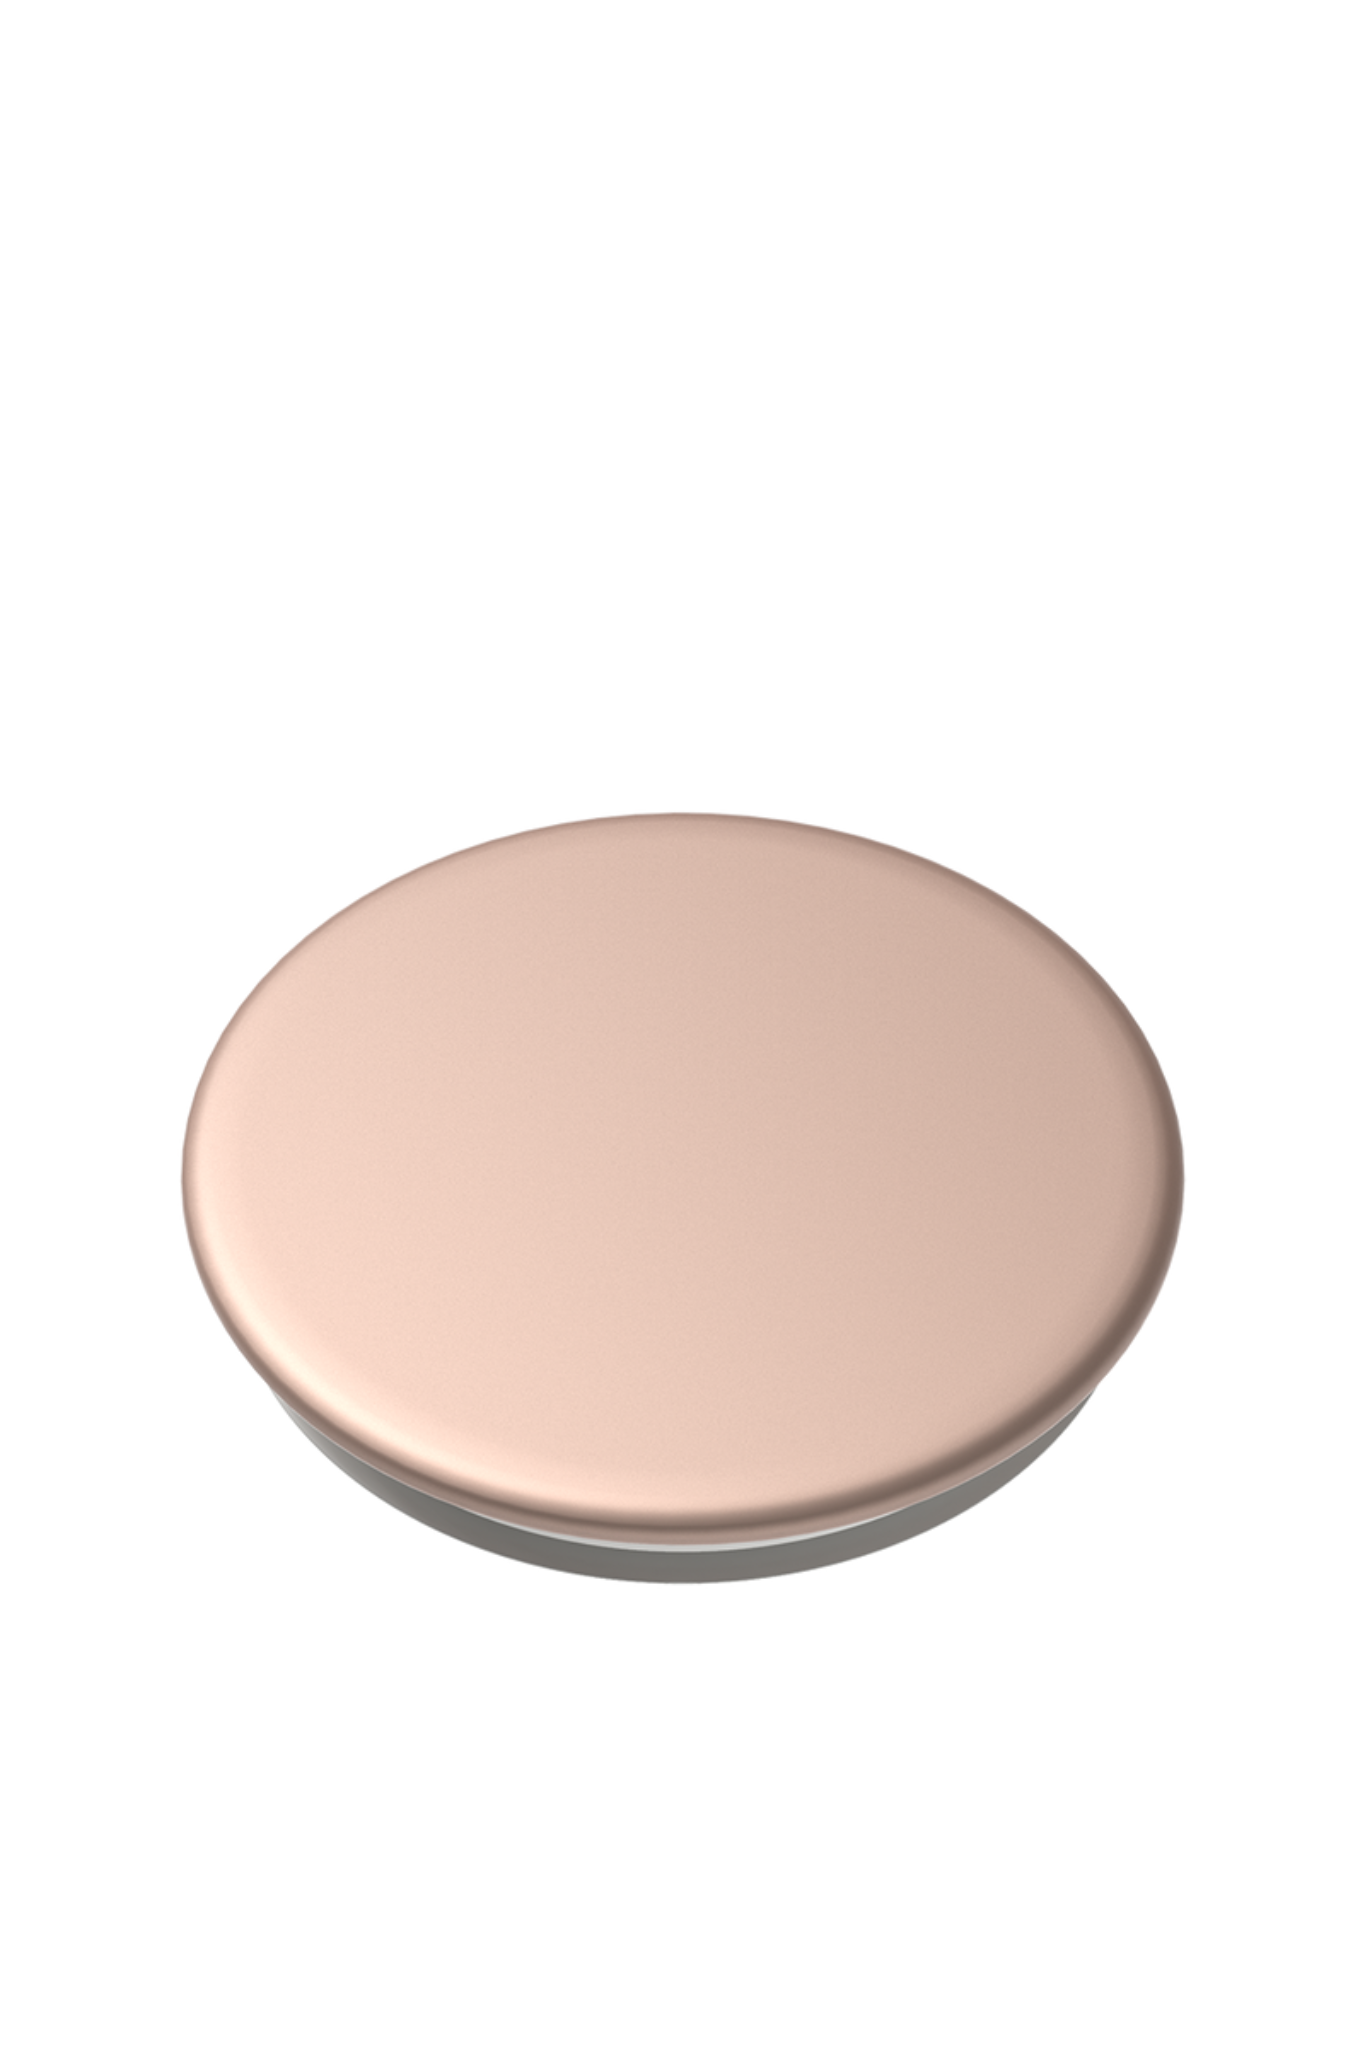 View 3 of PopSockets Rose Gold Aluminum, a Gifts from Larrea Cove. Detail: .